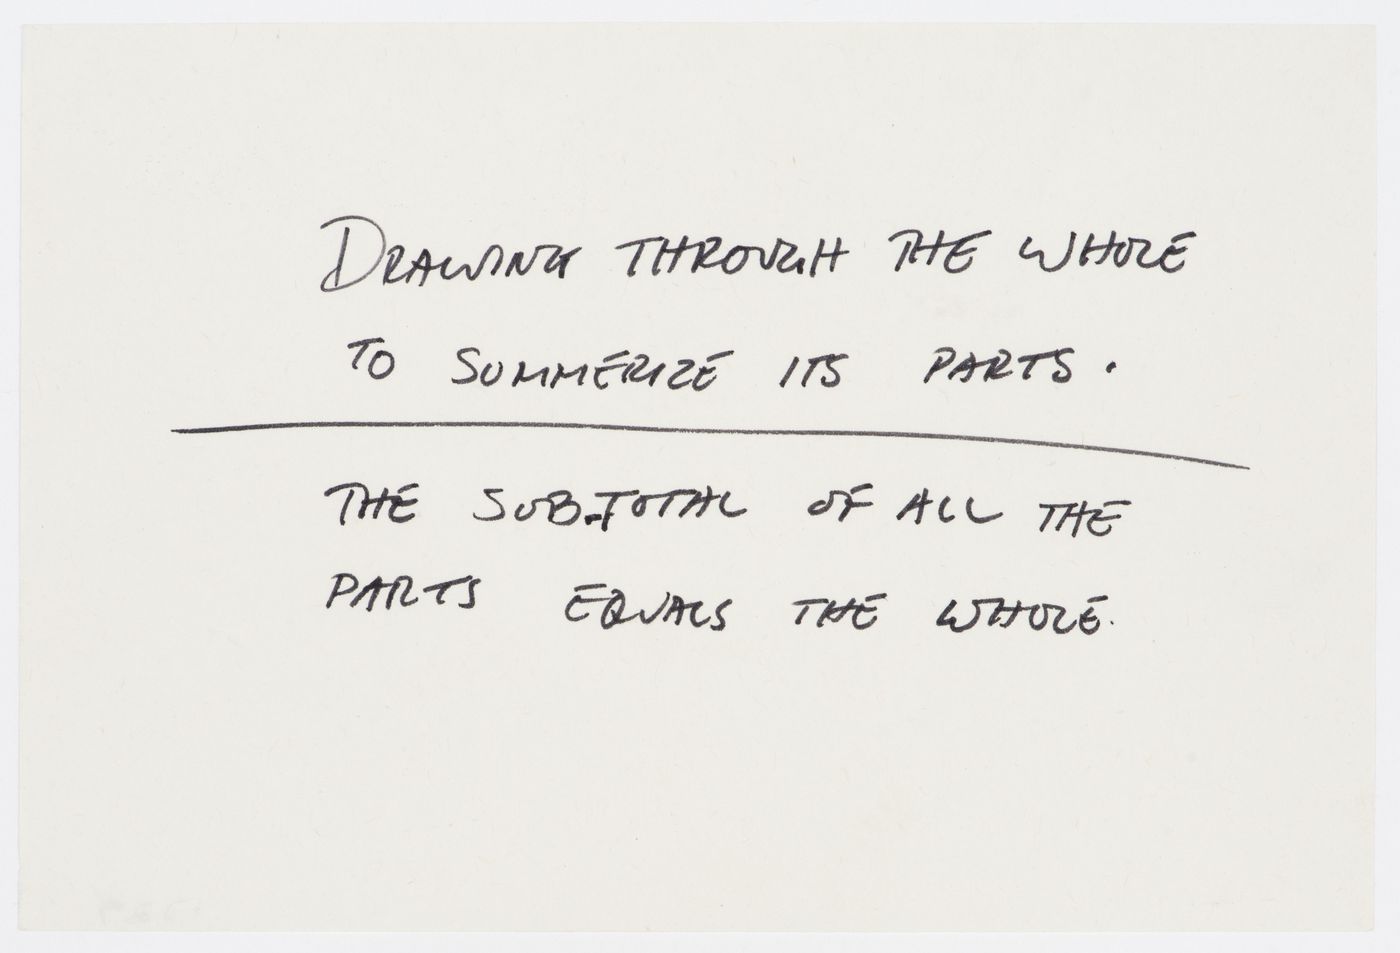 Drawing through the whole to summerize its parts. / The sub-total of all the parts equals the whole.